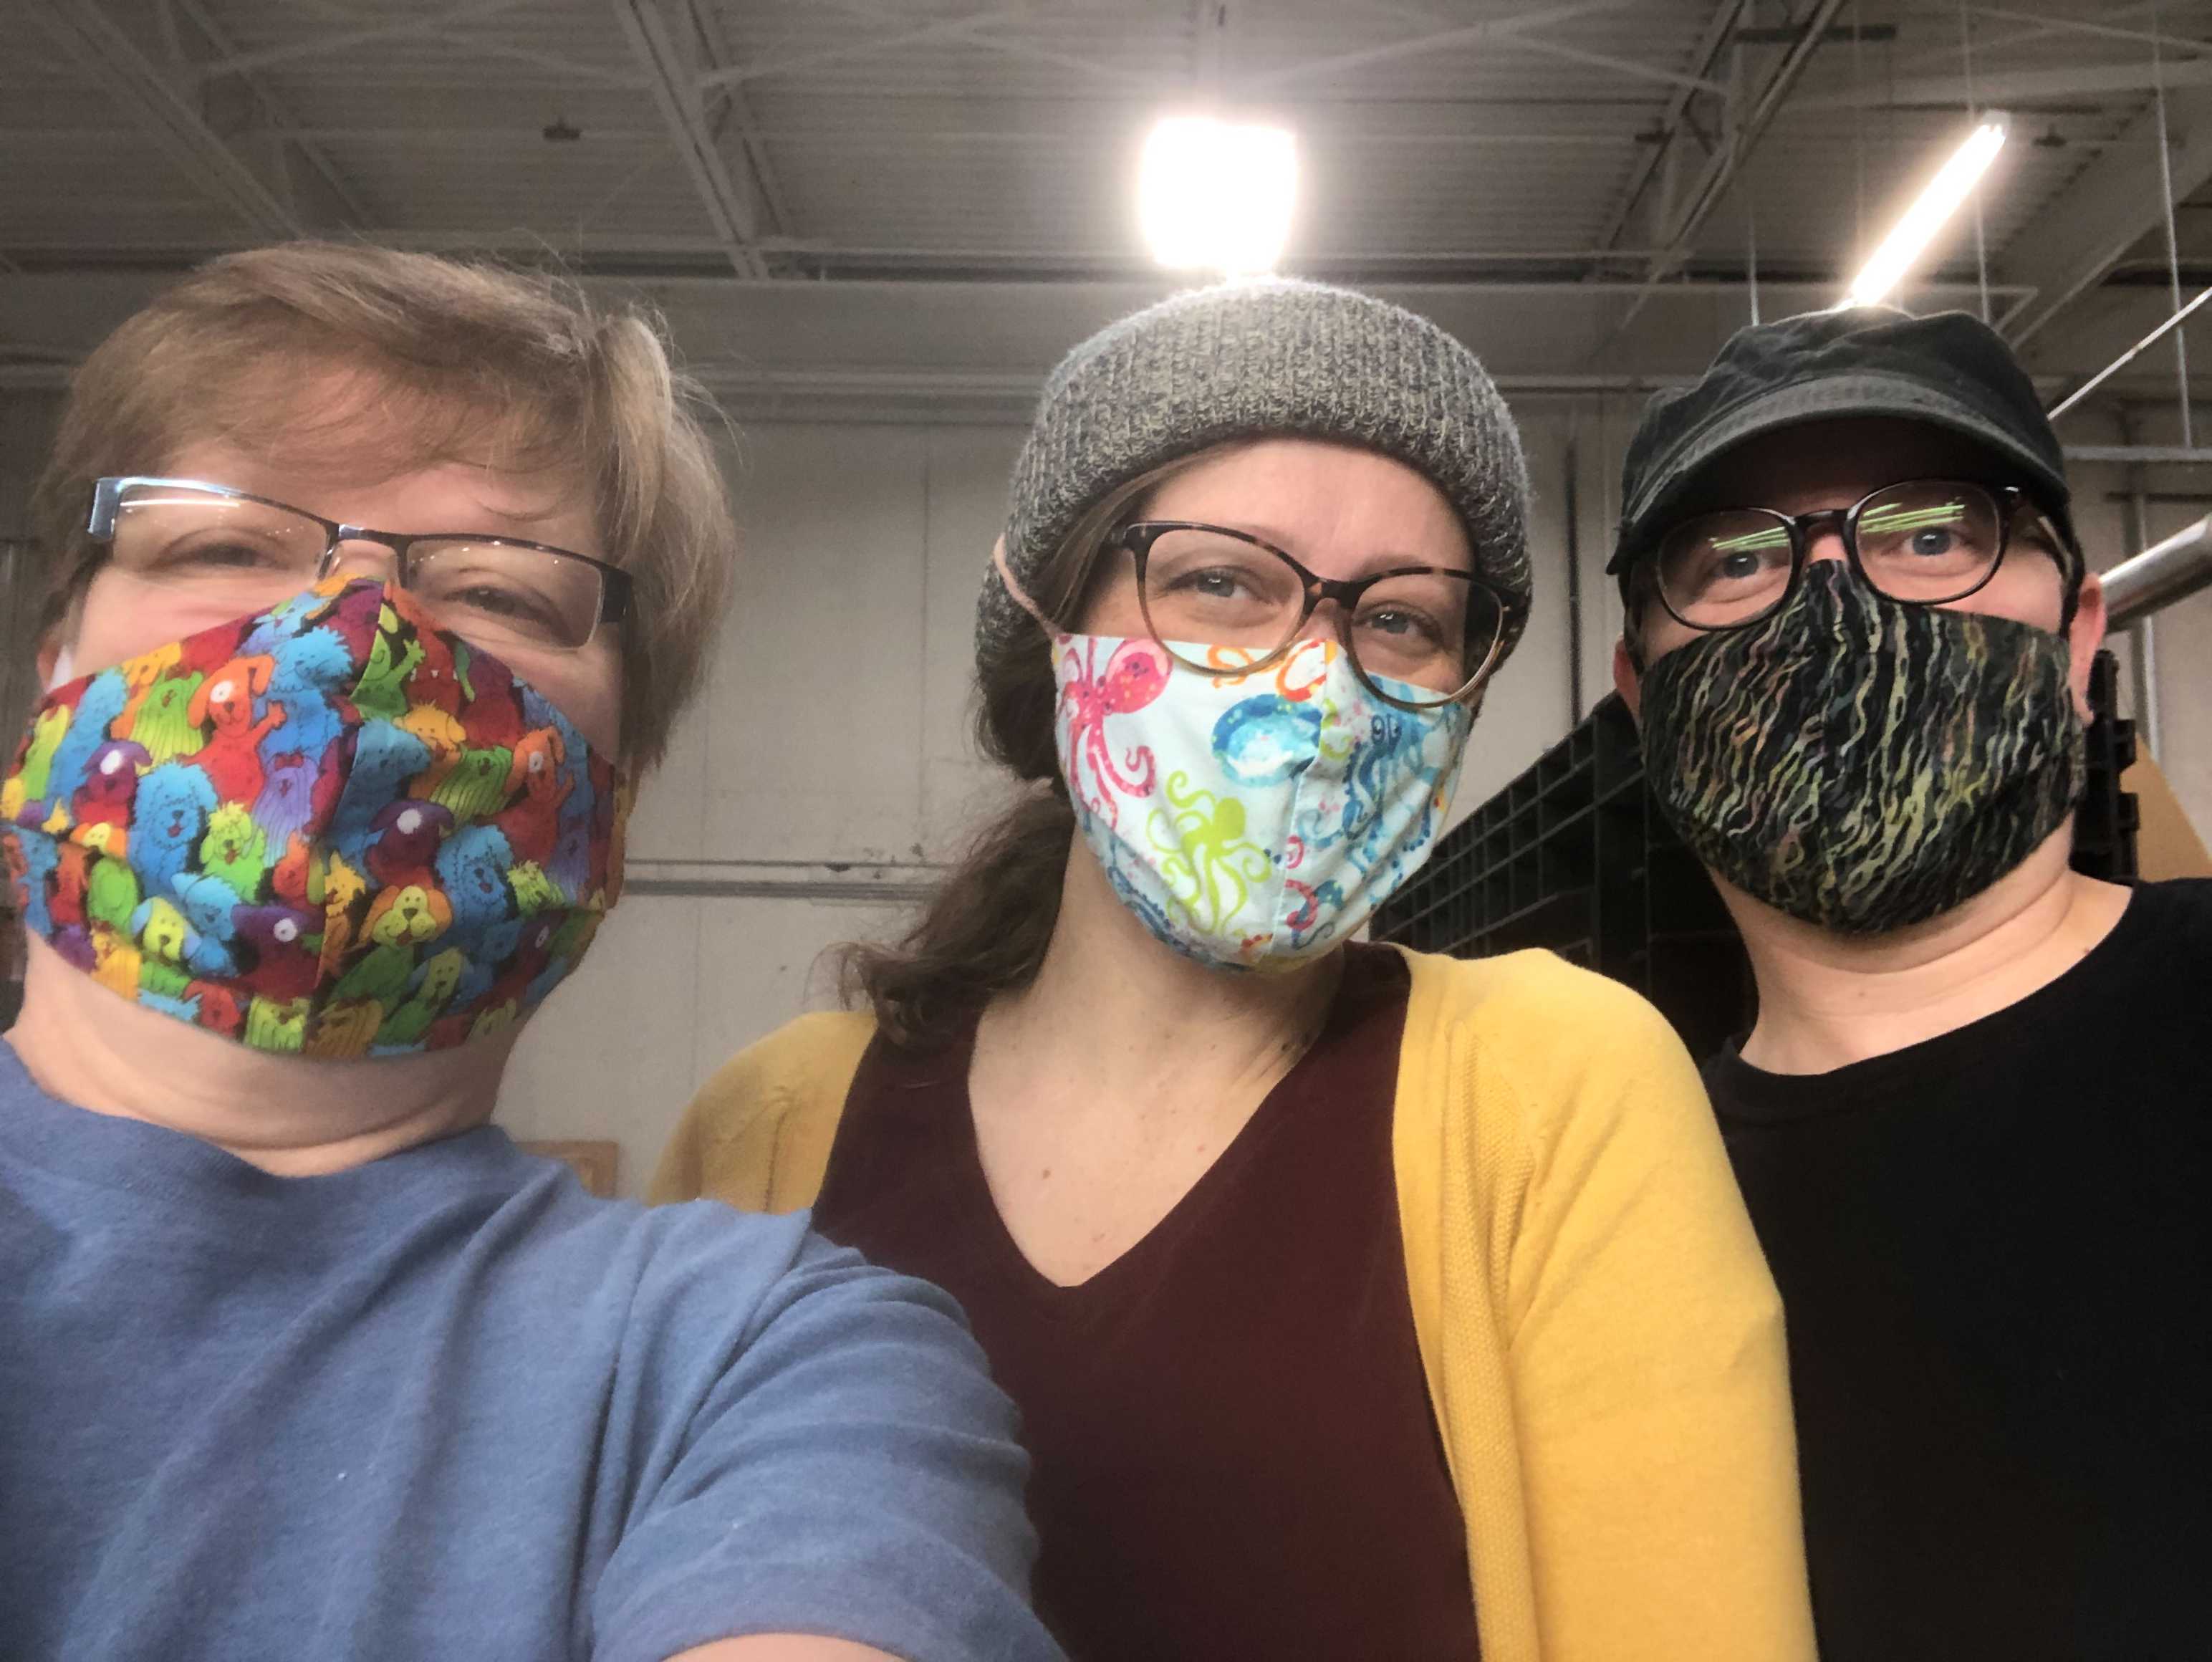 Talea with East Fork employees Lisa and Brock wearing masks